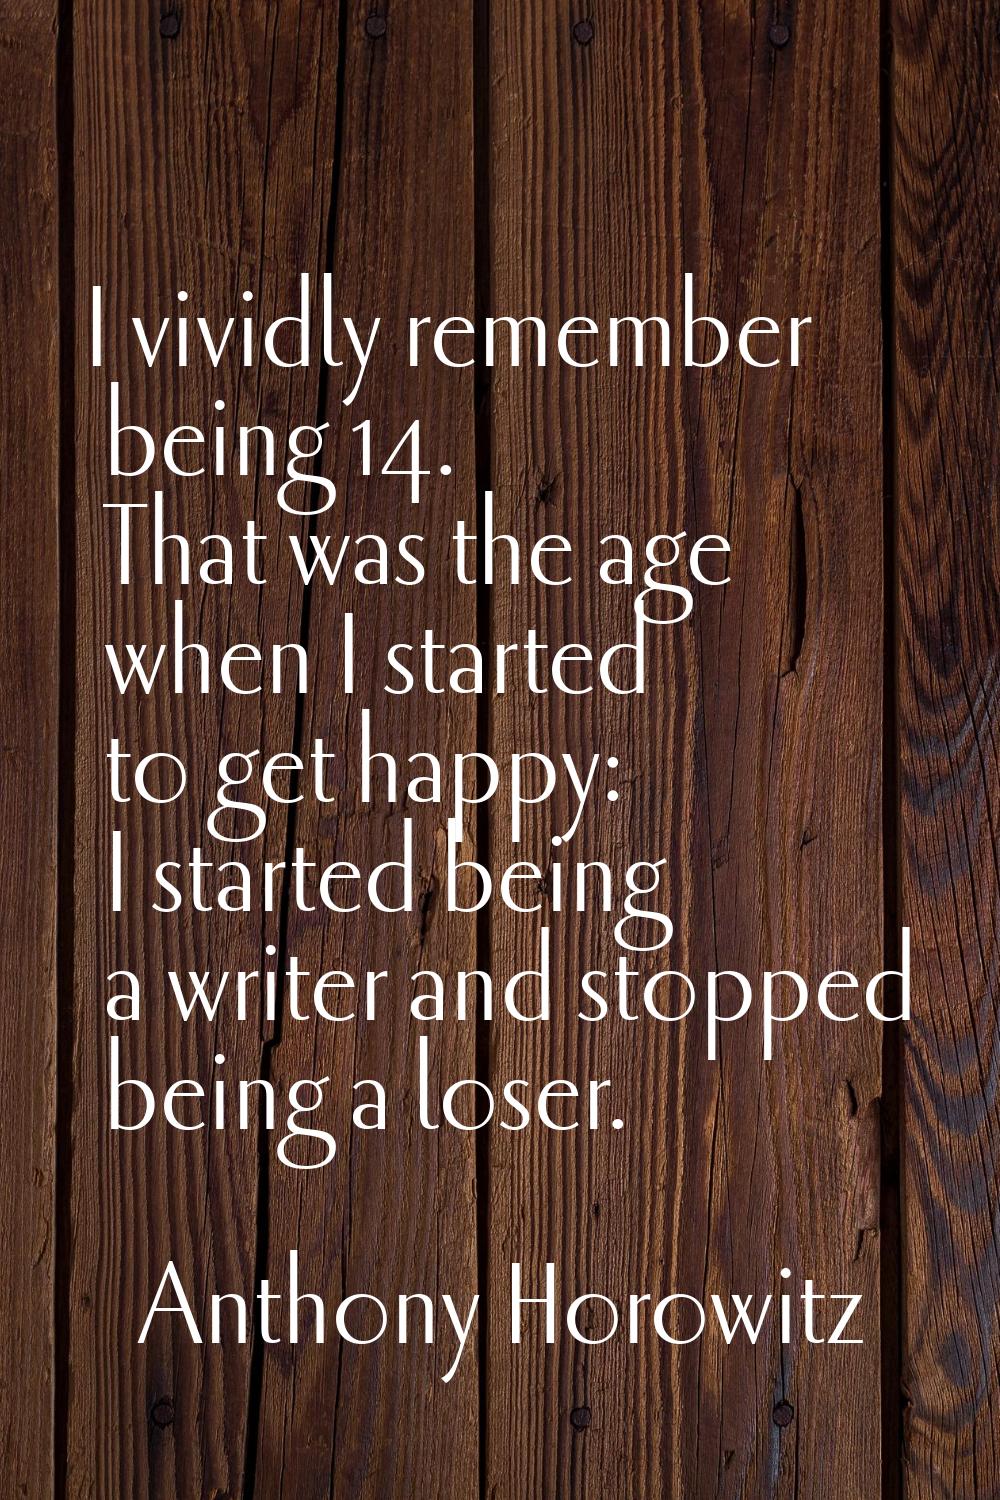 I vividly remember being 14. That was the age when I started to get happy: I started being a writer